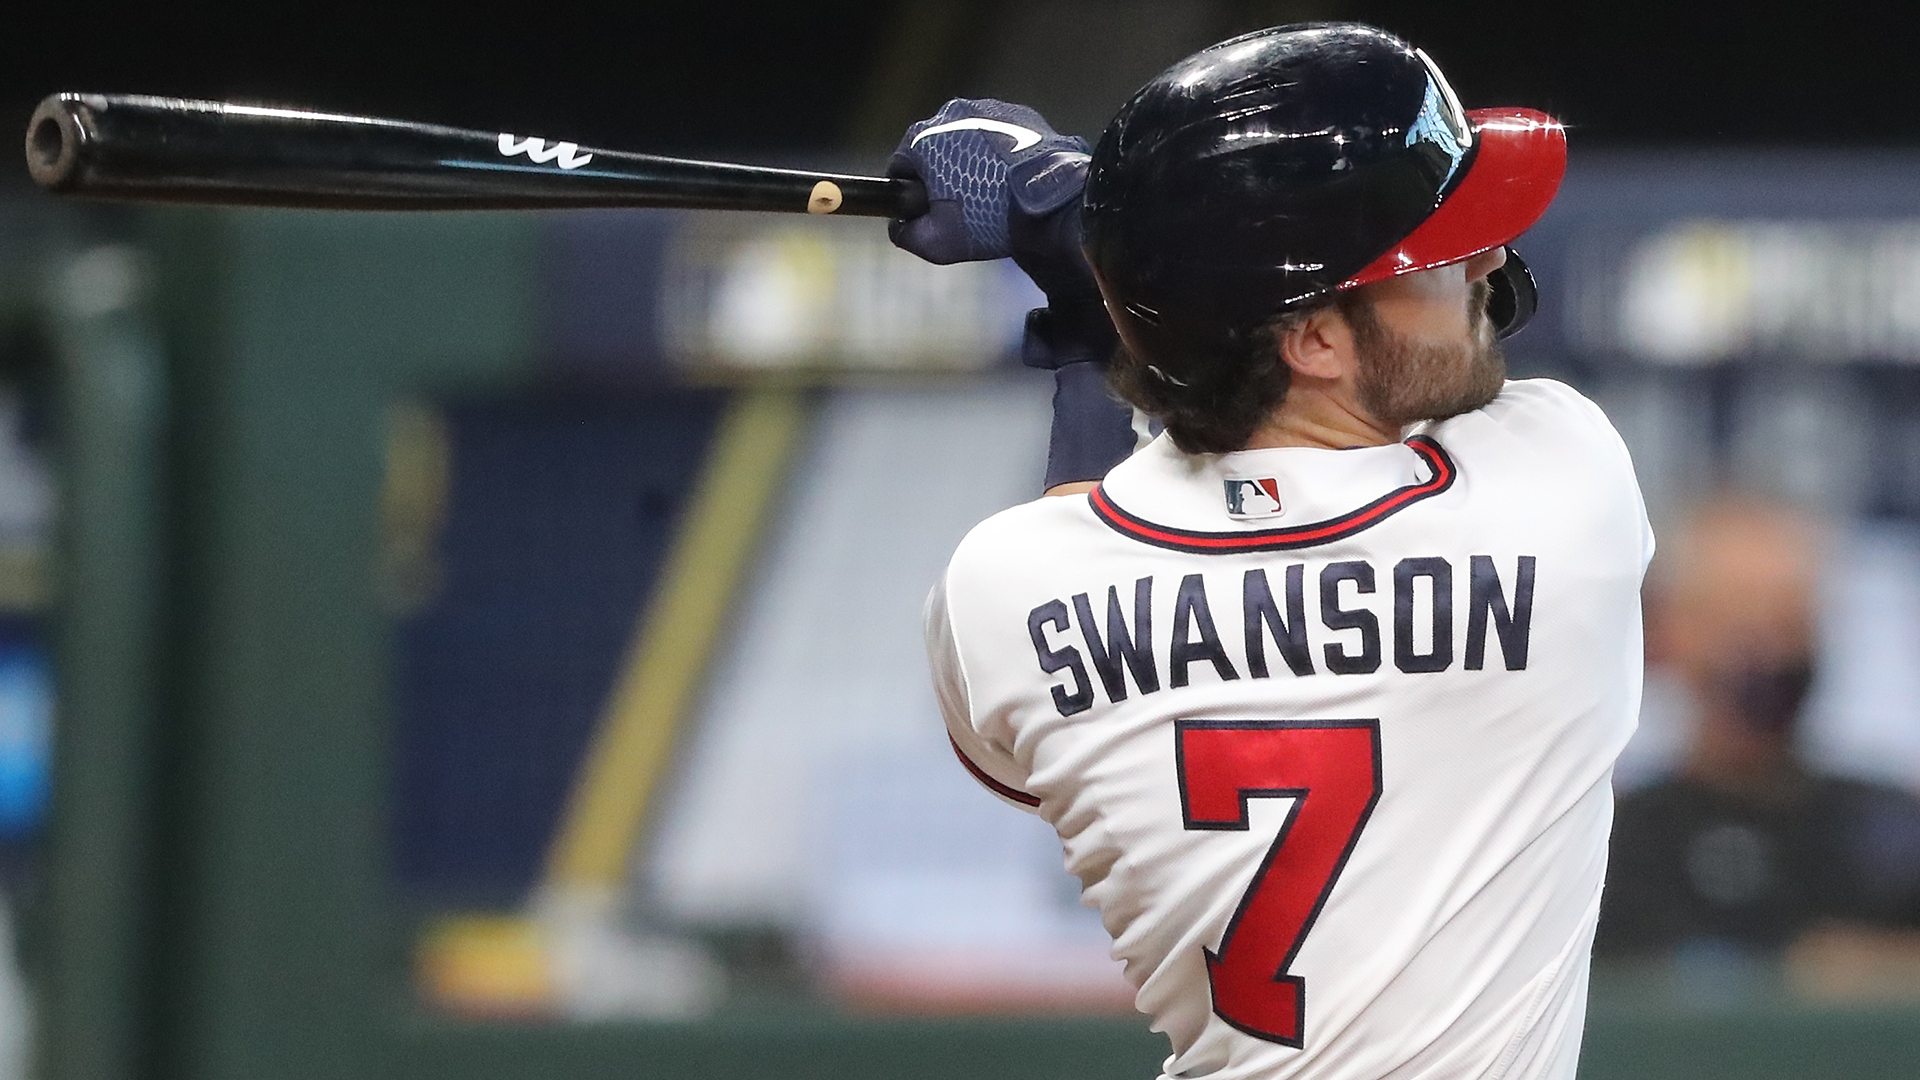 Hillsboro Hops  Its a lovely day for a Dansby Swanson Wallpaper  Wednesday Check it out   Facebook